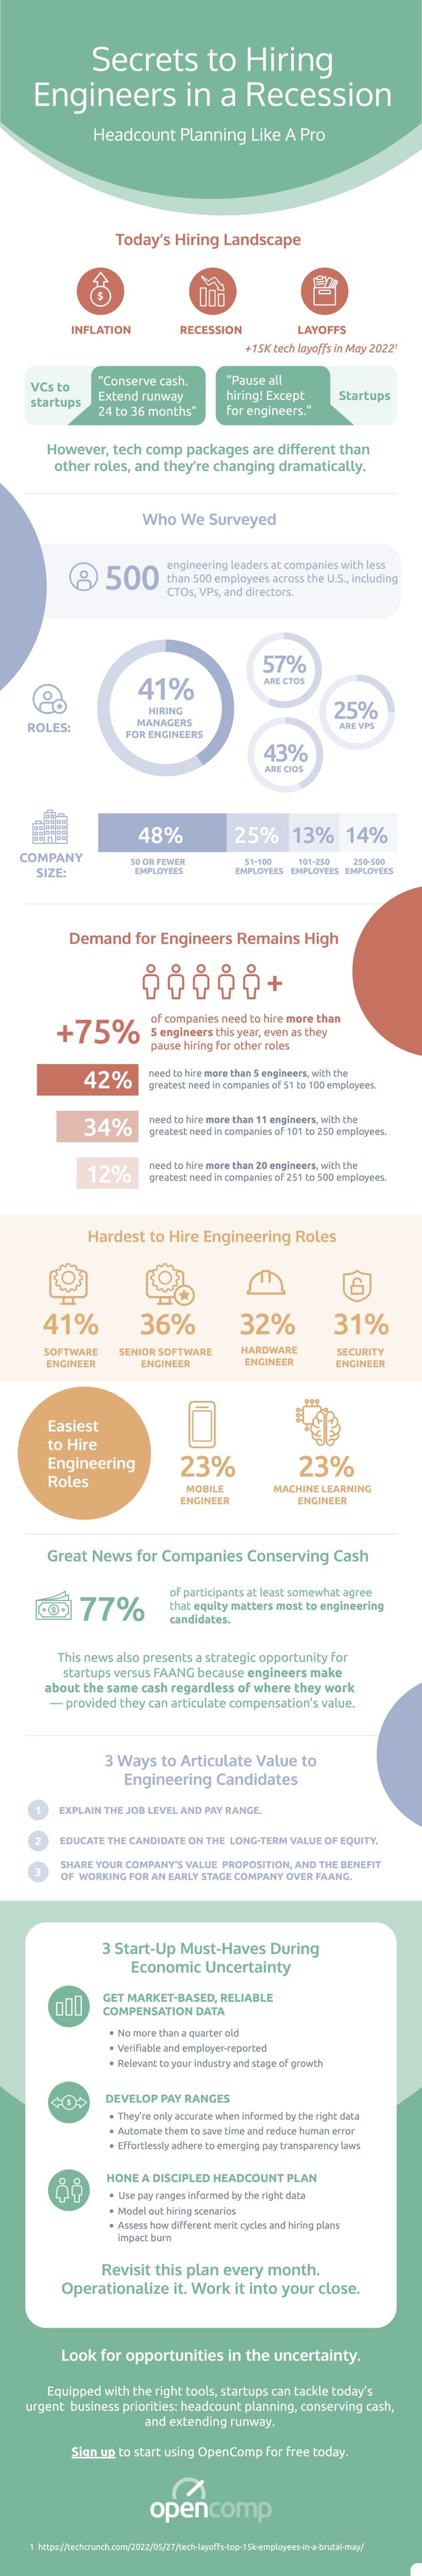 OpenComp-Infographic-Secrets to Hiring Engineers in a Recession